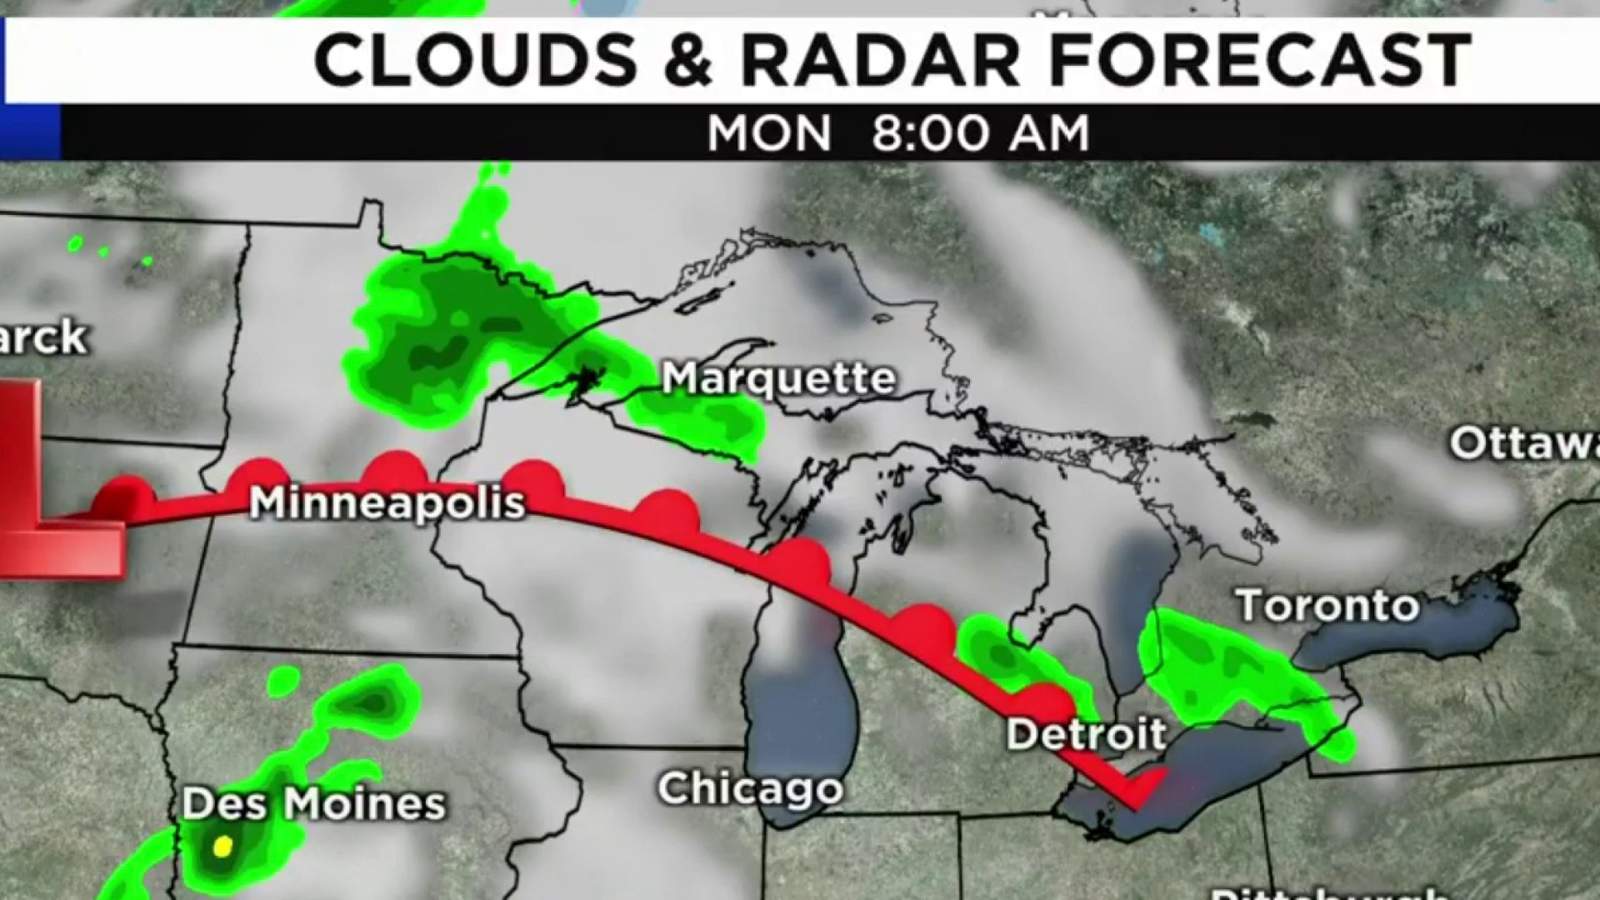 Metro Detroit weather: Winter weather makes way for nicer weekend